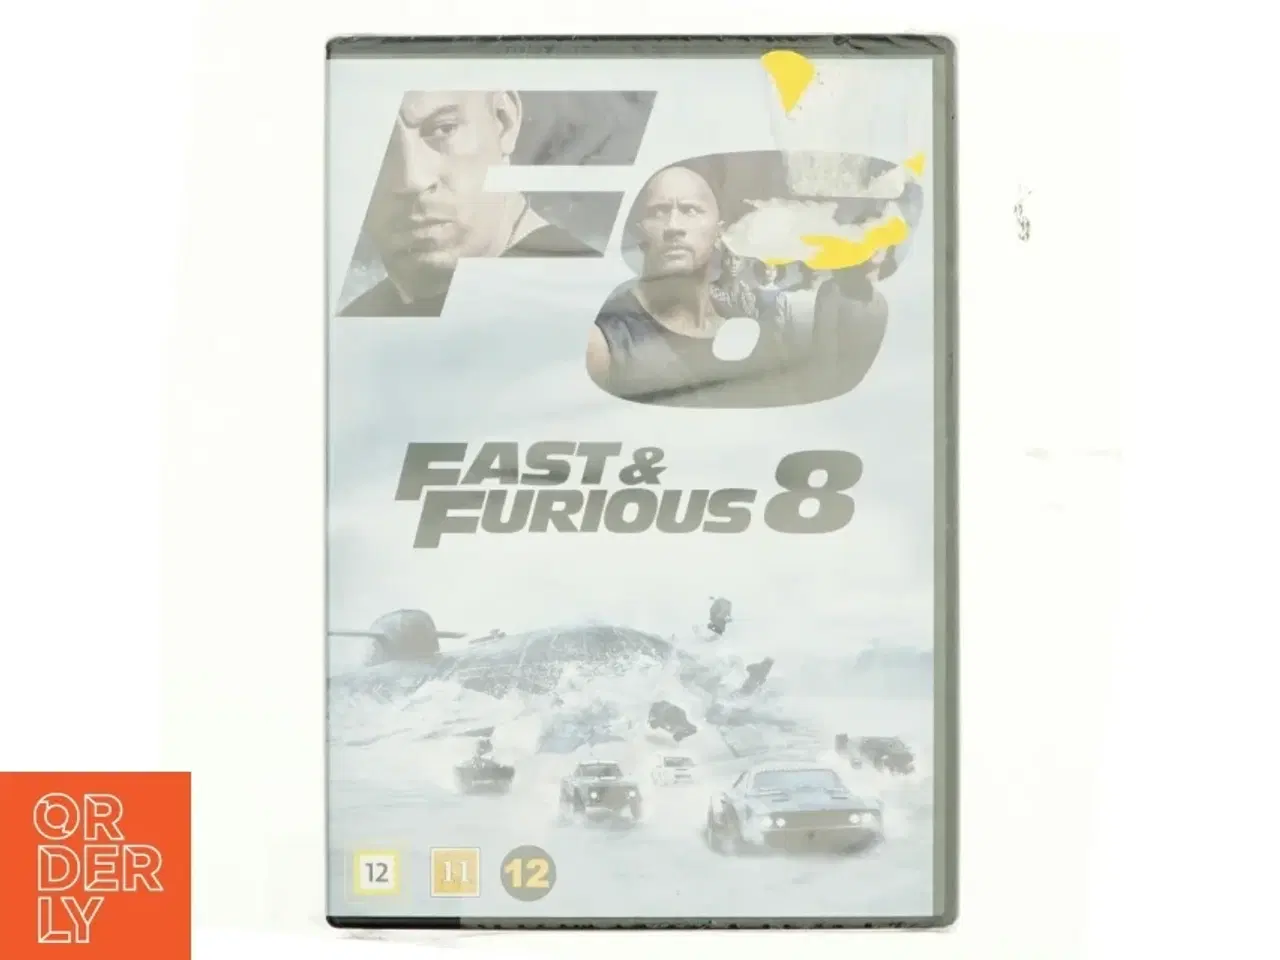 Billede 1 - The Fast & The Furious 8 (dvd)